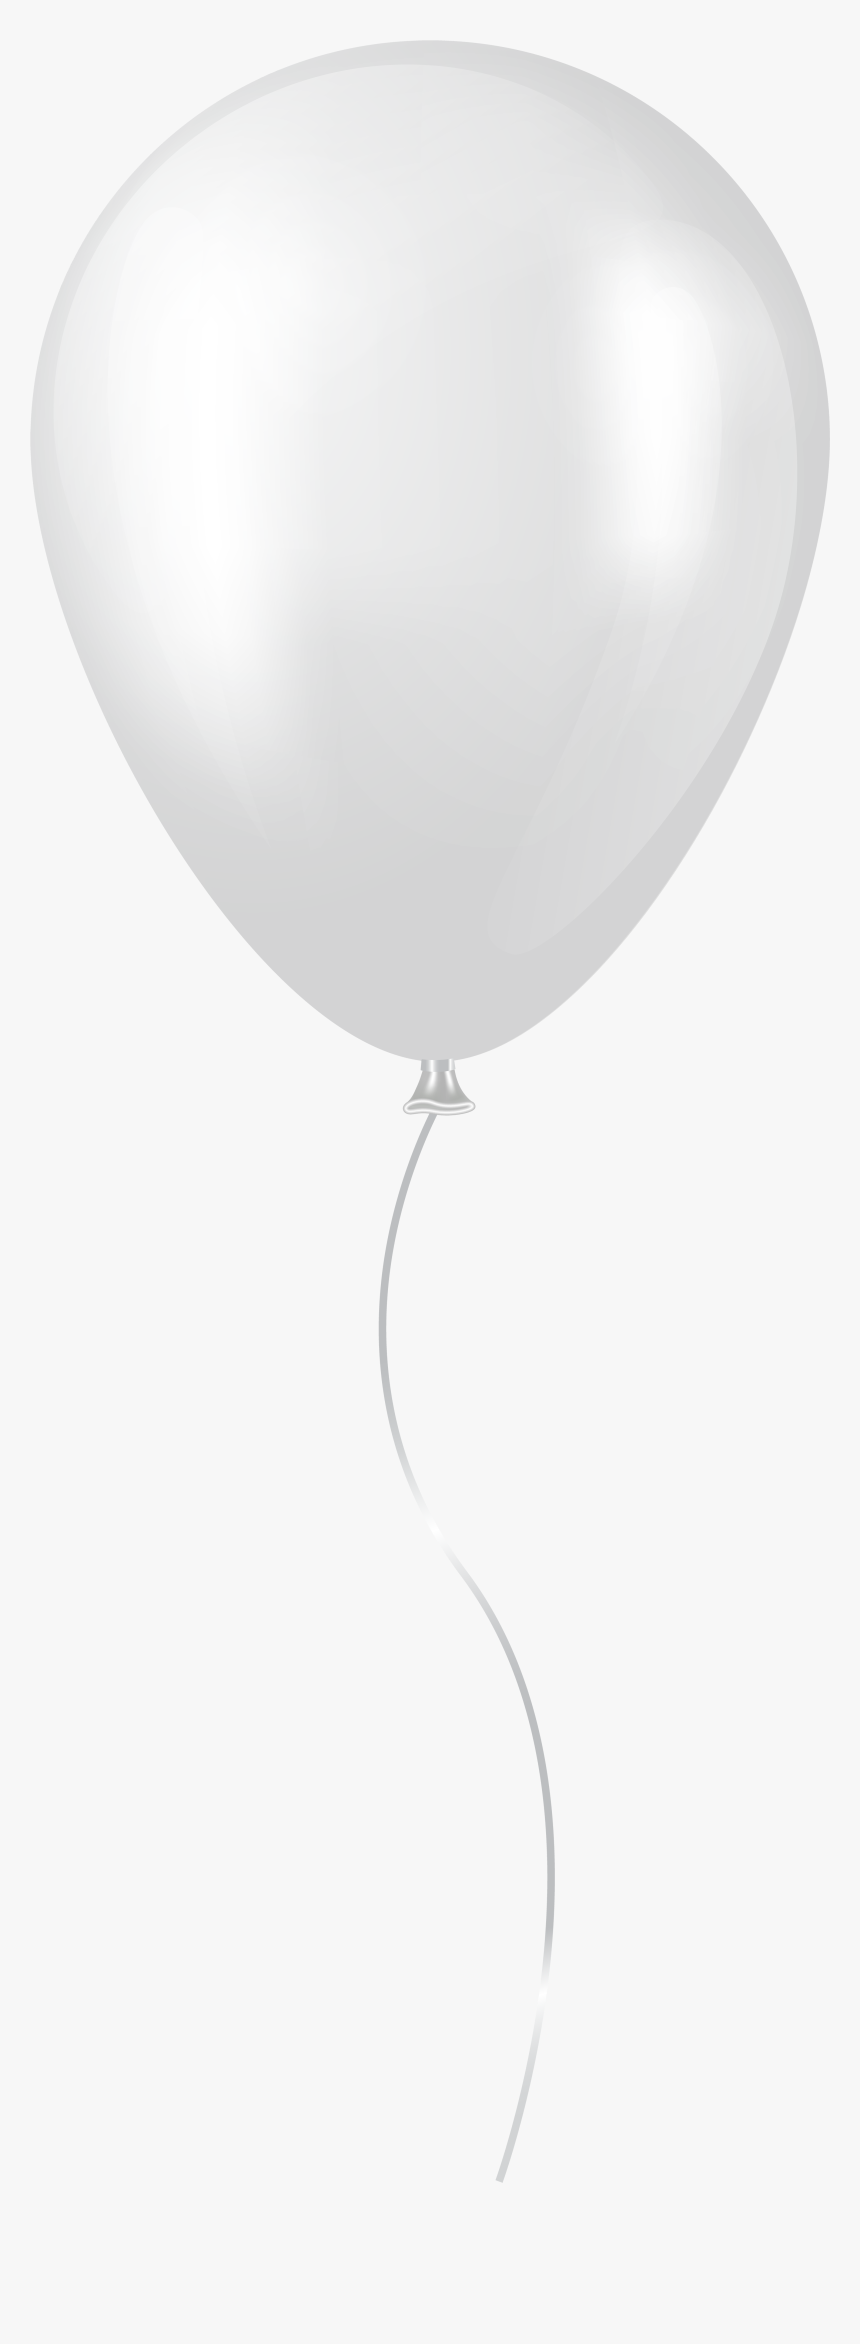 Balloon Png White - White Balloon Transparent Background, Png Download, Free Download